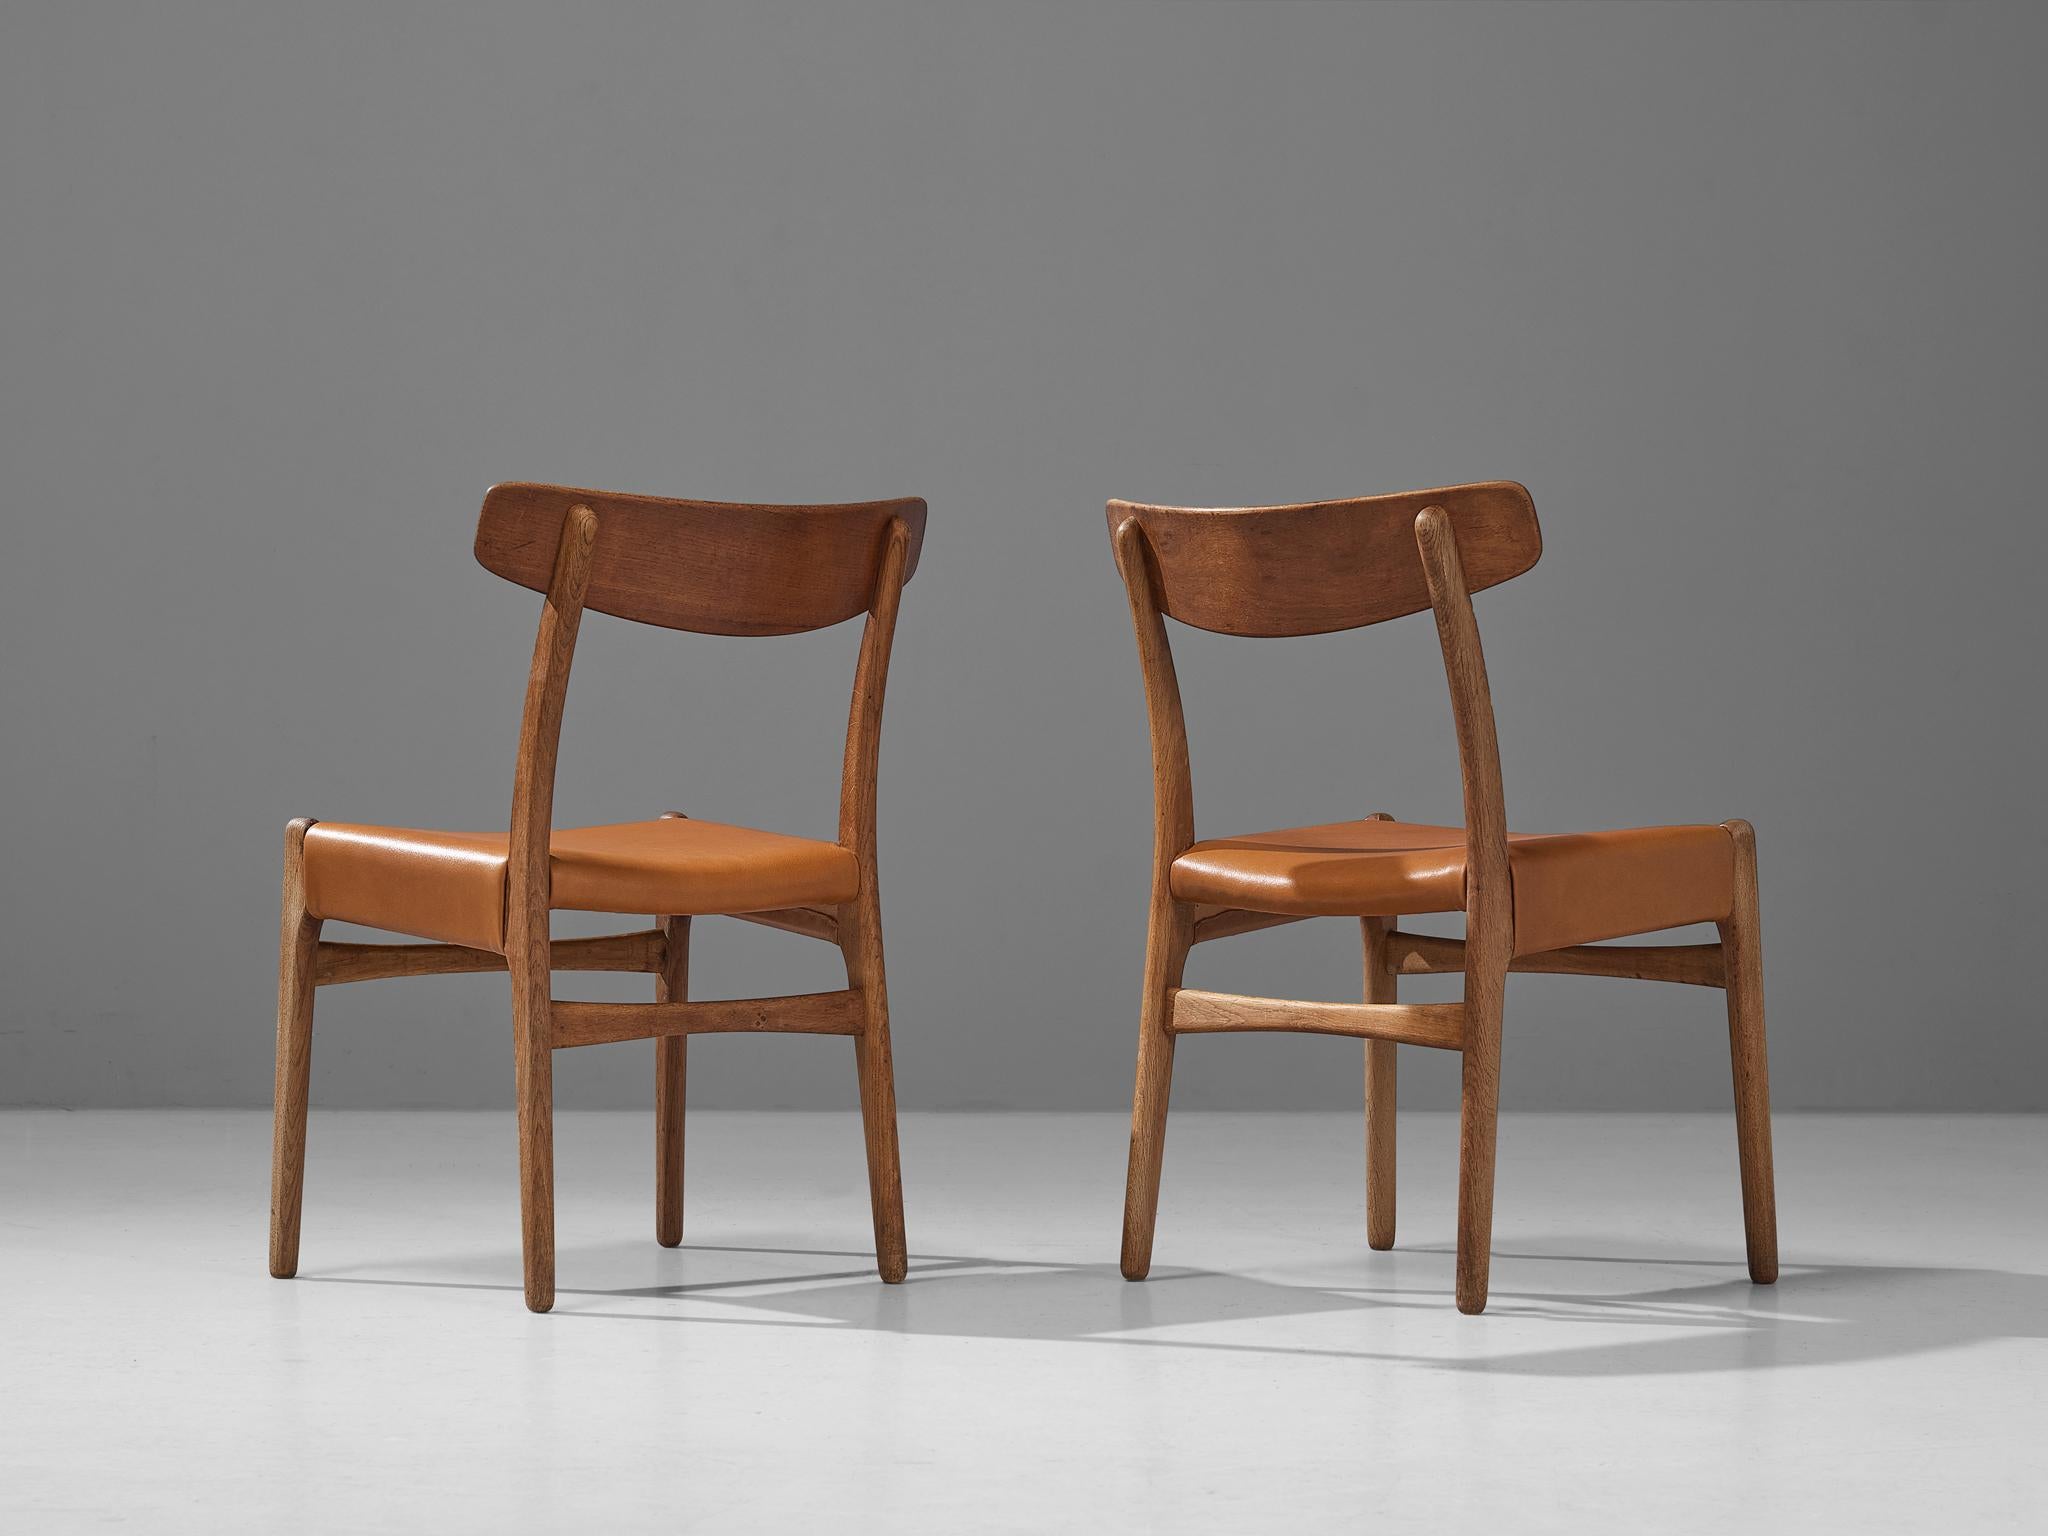 Hans J. Wegner for Carl Hansen & Søn, pair of dining chairs model ‘C23’, oak, teak, cognac leather, Denmark, designed in 1950 

The chair model ‘C23’ features sophisticated details that characterize Wegner’s well-known designs. Per example, note the